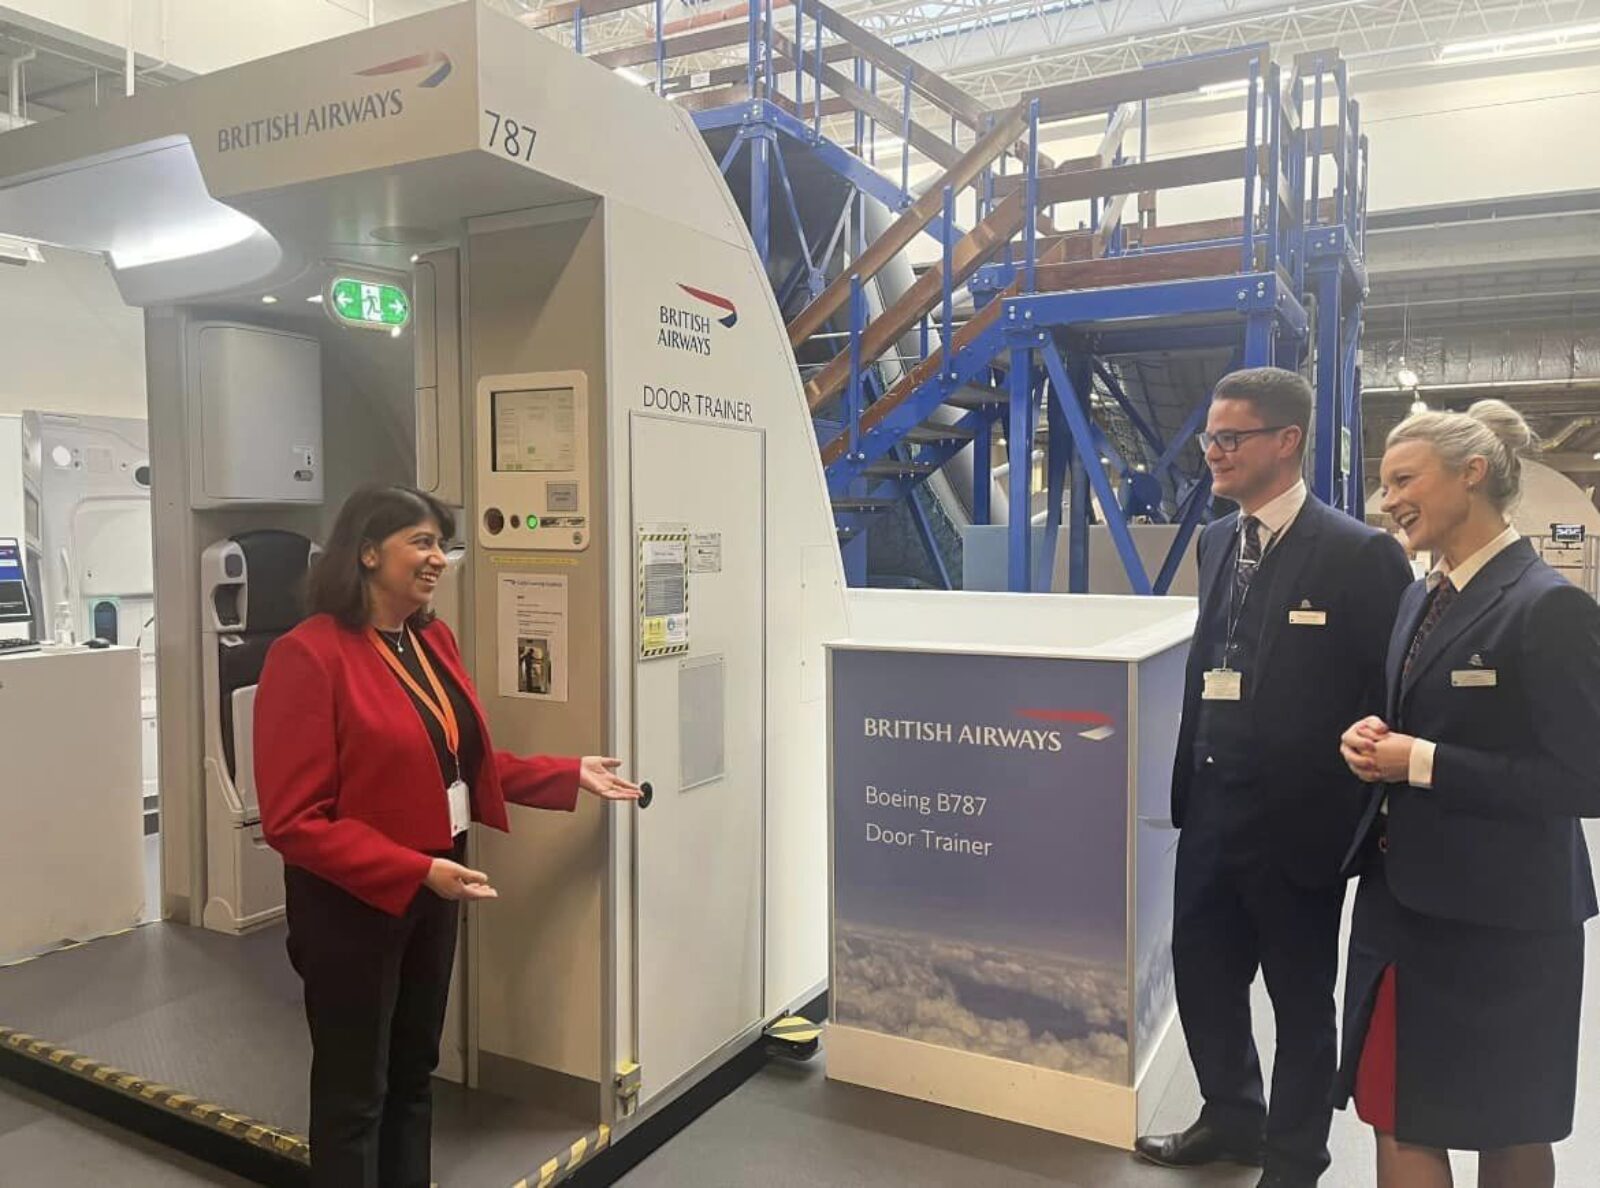 Seema Malhotra MP meets air stewarding trainers in front of a "door trainer", used to show trainees how to operate an aeroplane